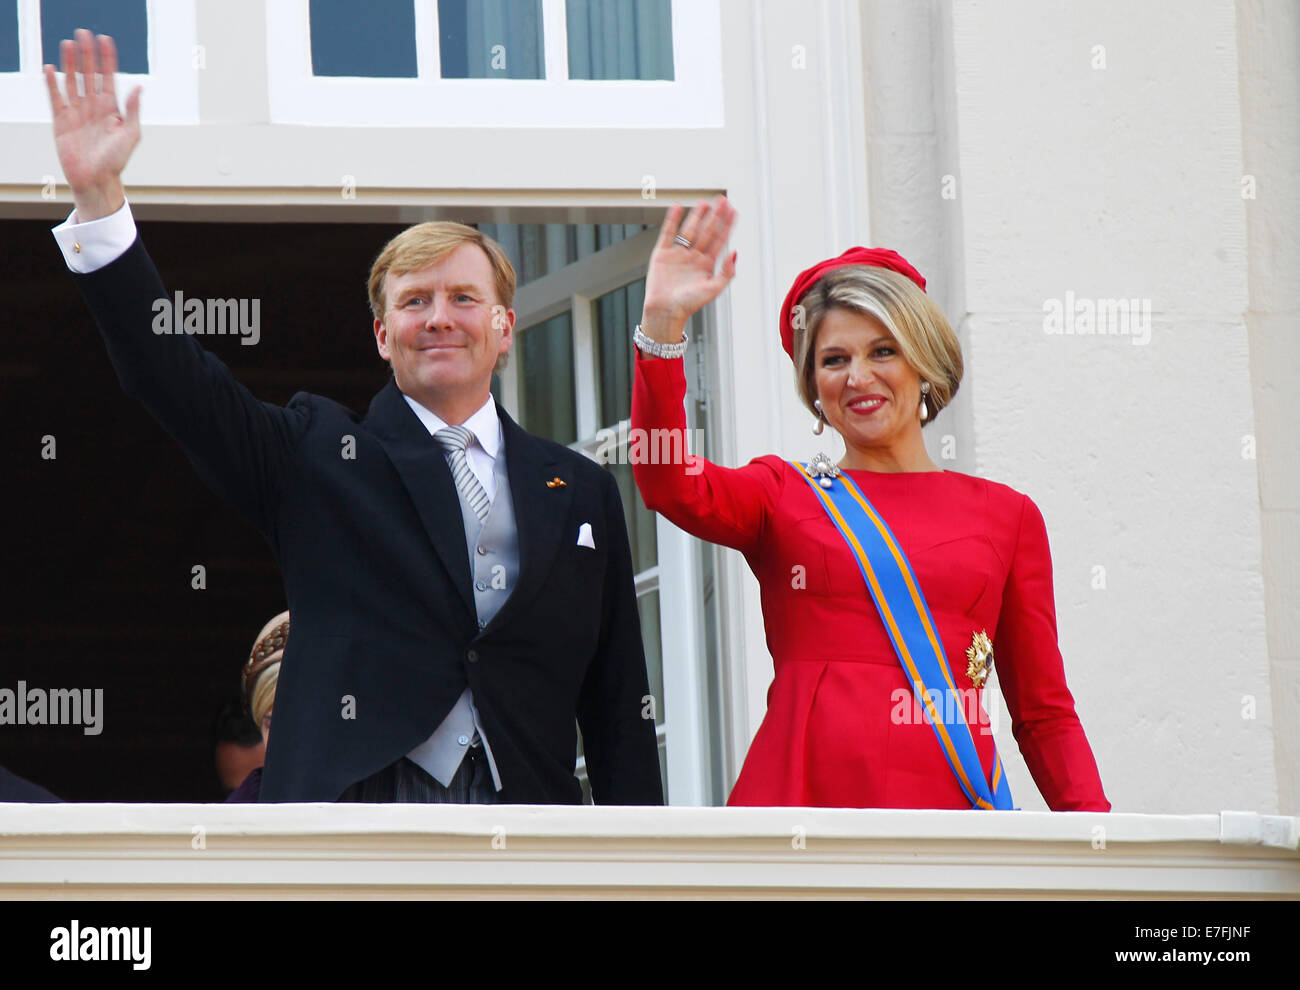 The Hague, Prince Day or the Budget Day. 16th Sep, 2014. Dutch King Willem-Alexander (L) and Queen Maxima wave to people on the balcony of Noordeinde Palace in the Hague, the Netherlands, on the Prince Day or the Budget Day, on Sept. 16, 2014. Credit:  Sylvia Lederer/Xinhua/Alamy Live News Stock Photo